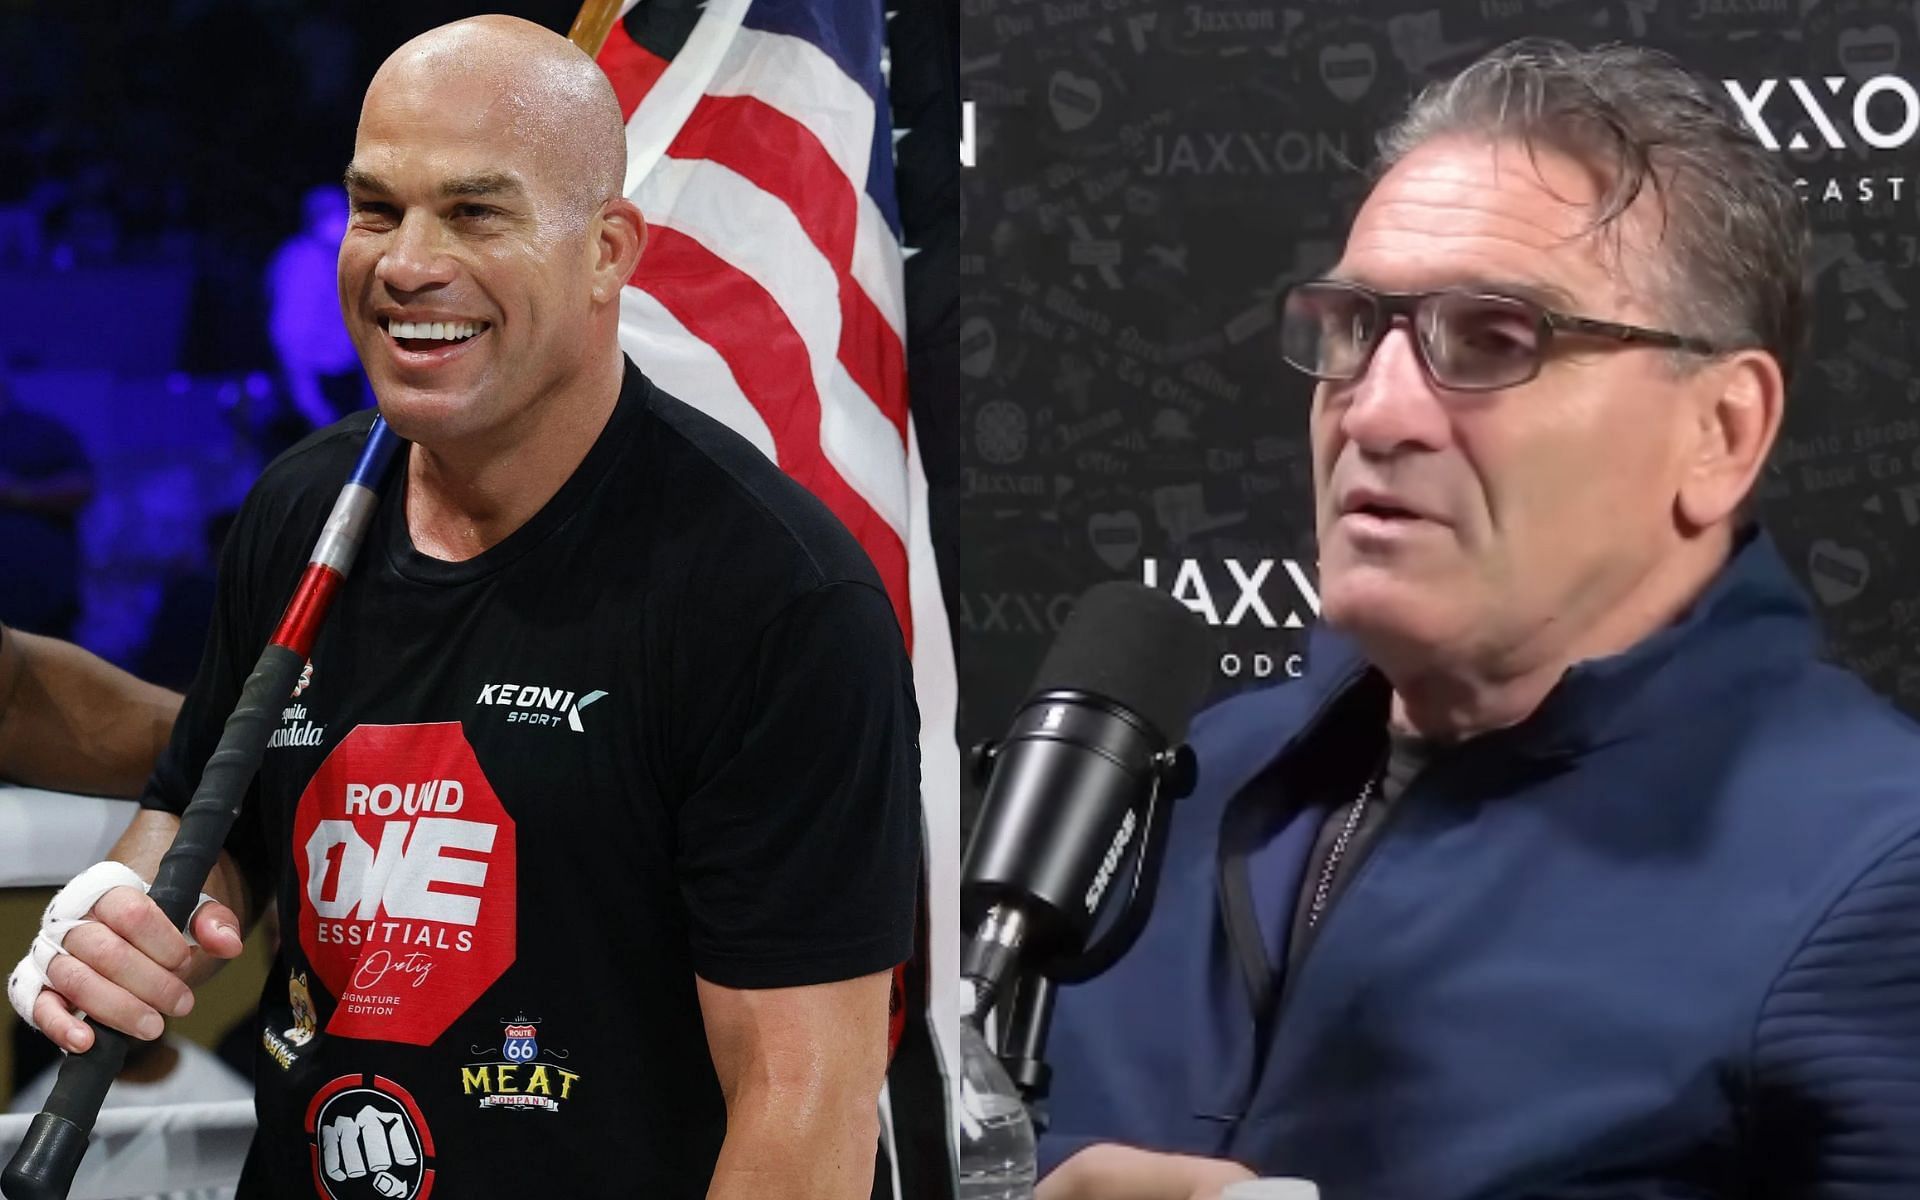 Hall of Famer Ken Shamrock opens up about importance of Tito Ortiz rivalry to the UFC [Image courtesy: Getty Images, and JAXXON PODCAST - YouTube]